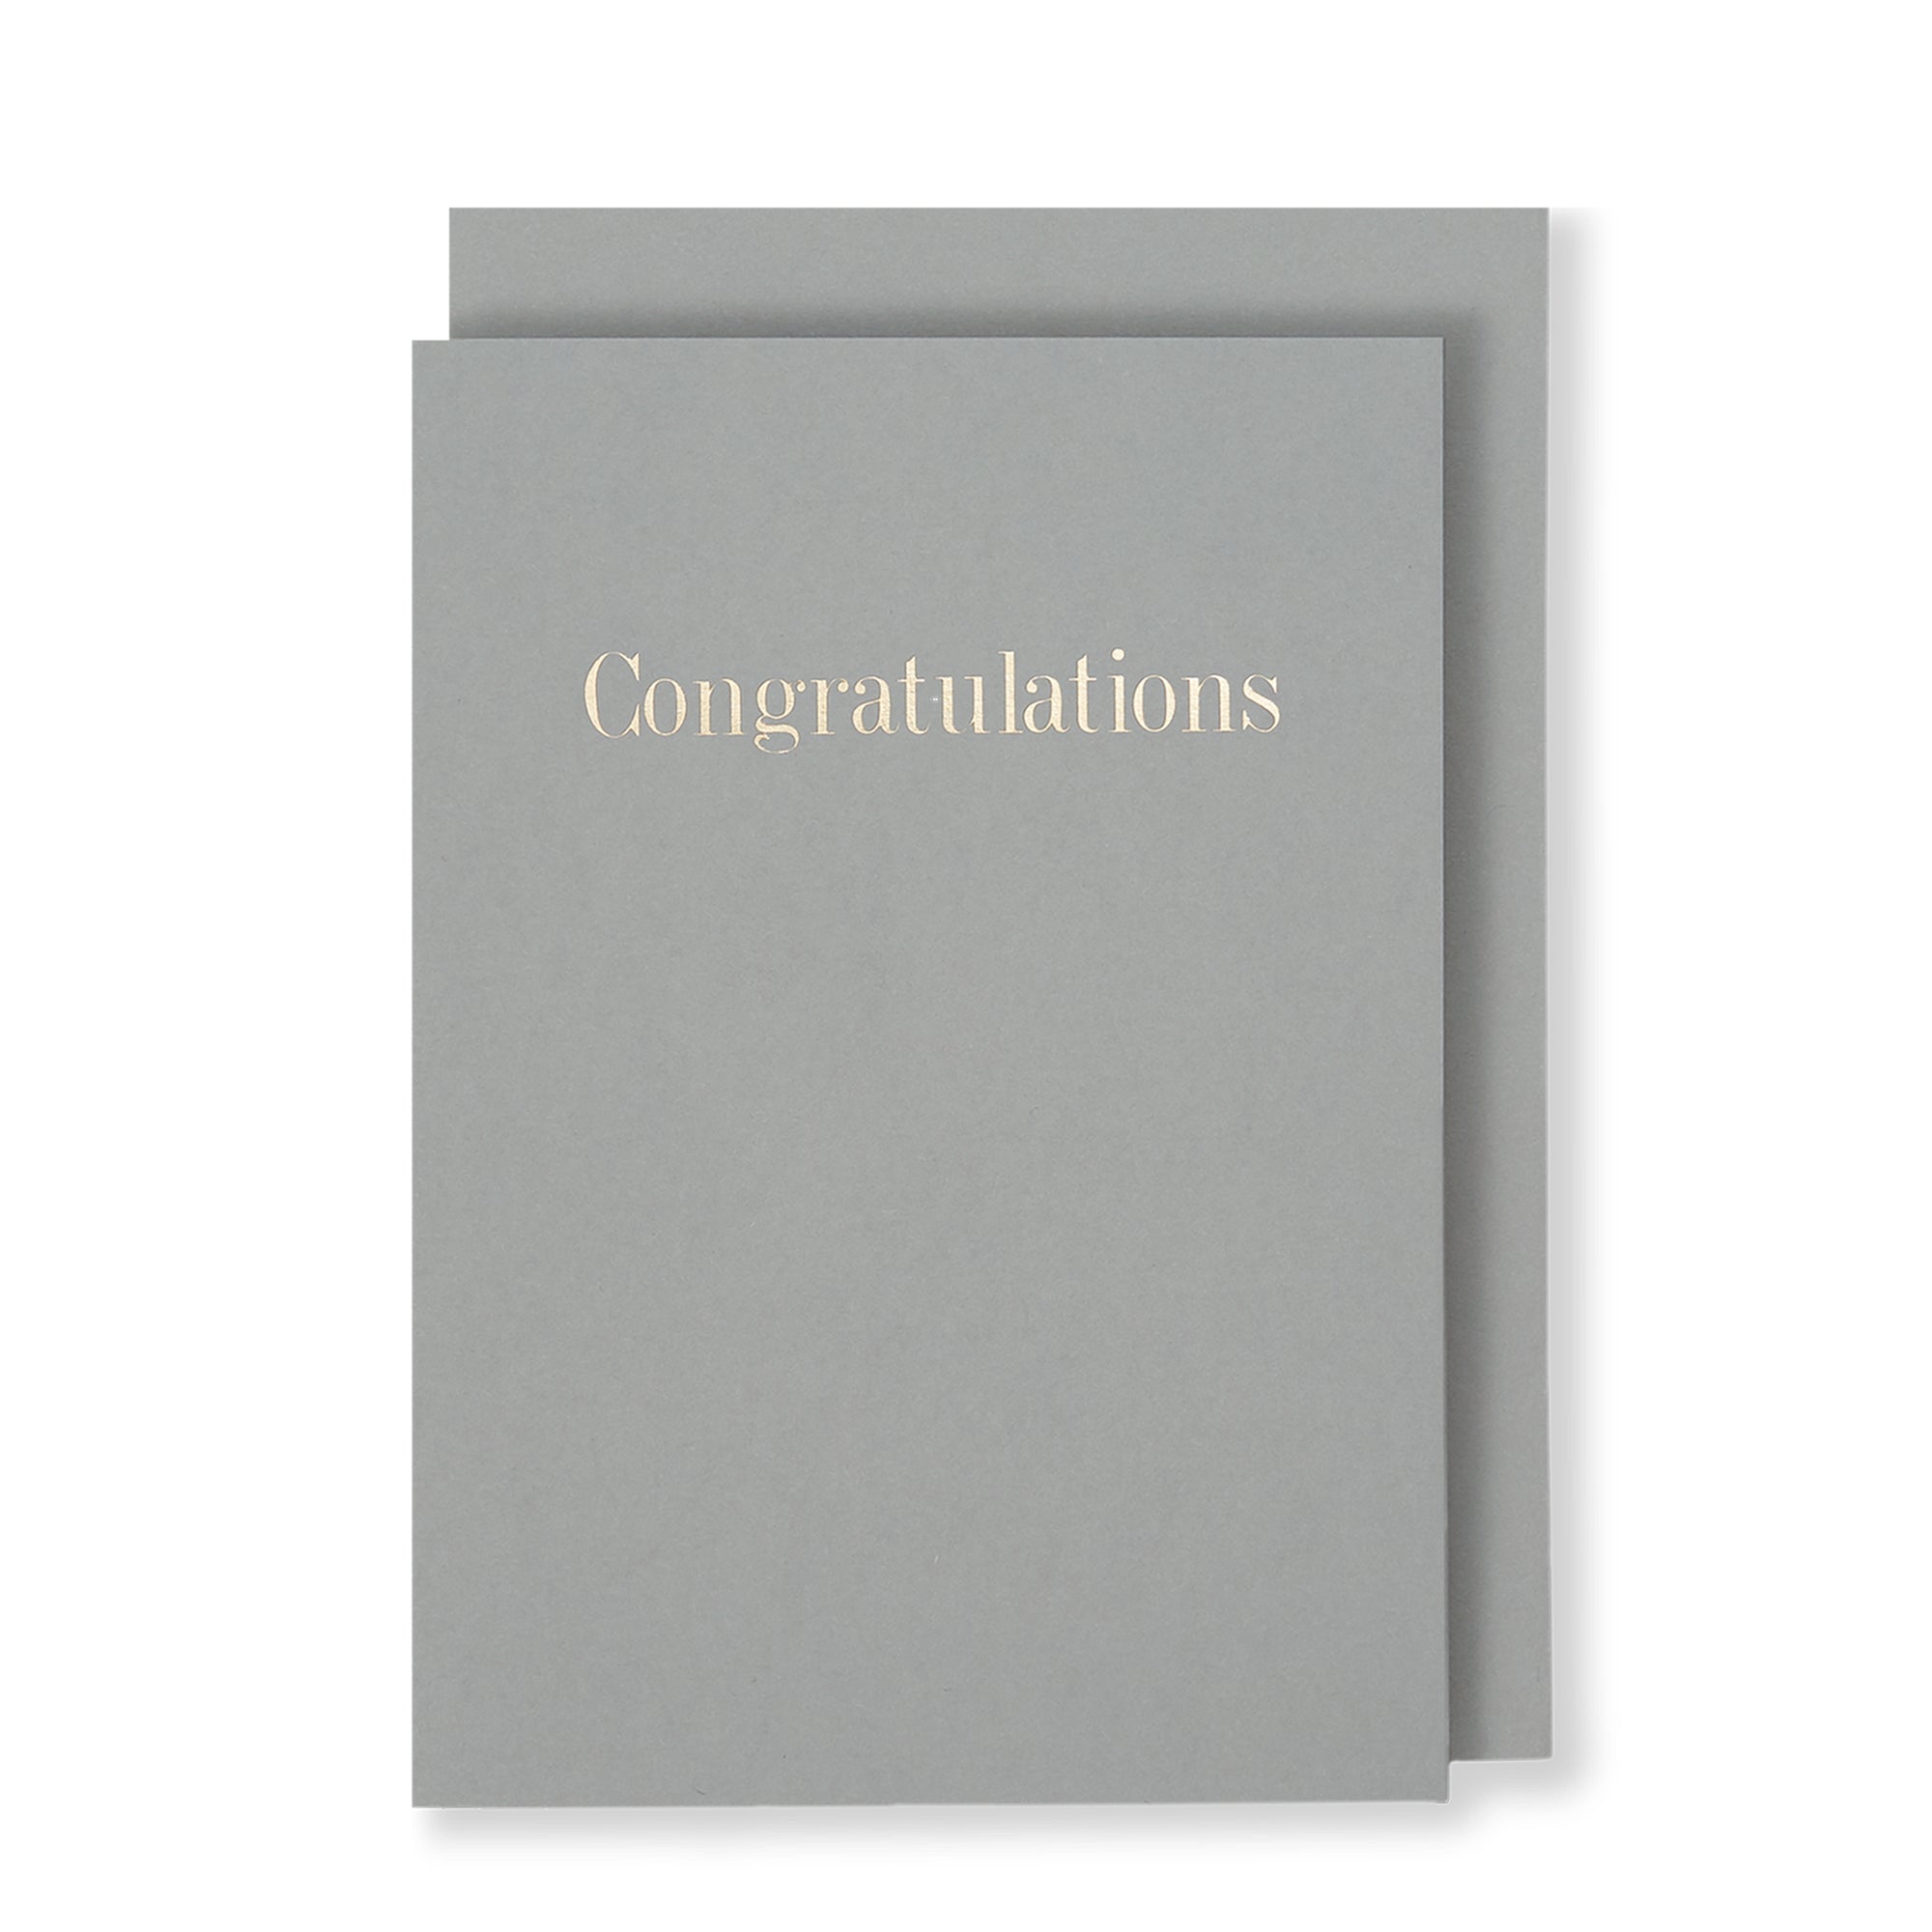 Congratulations Greeting Card in Grey, Front